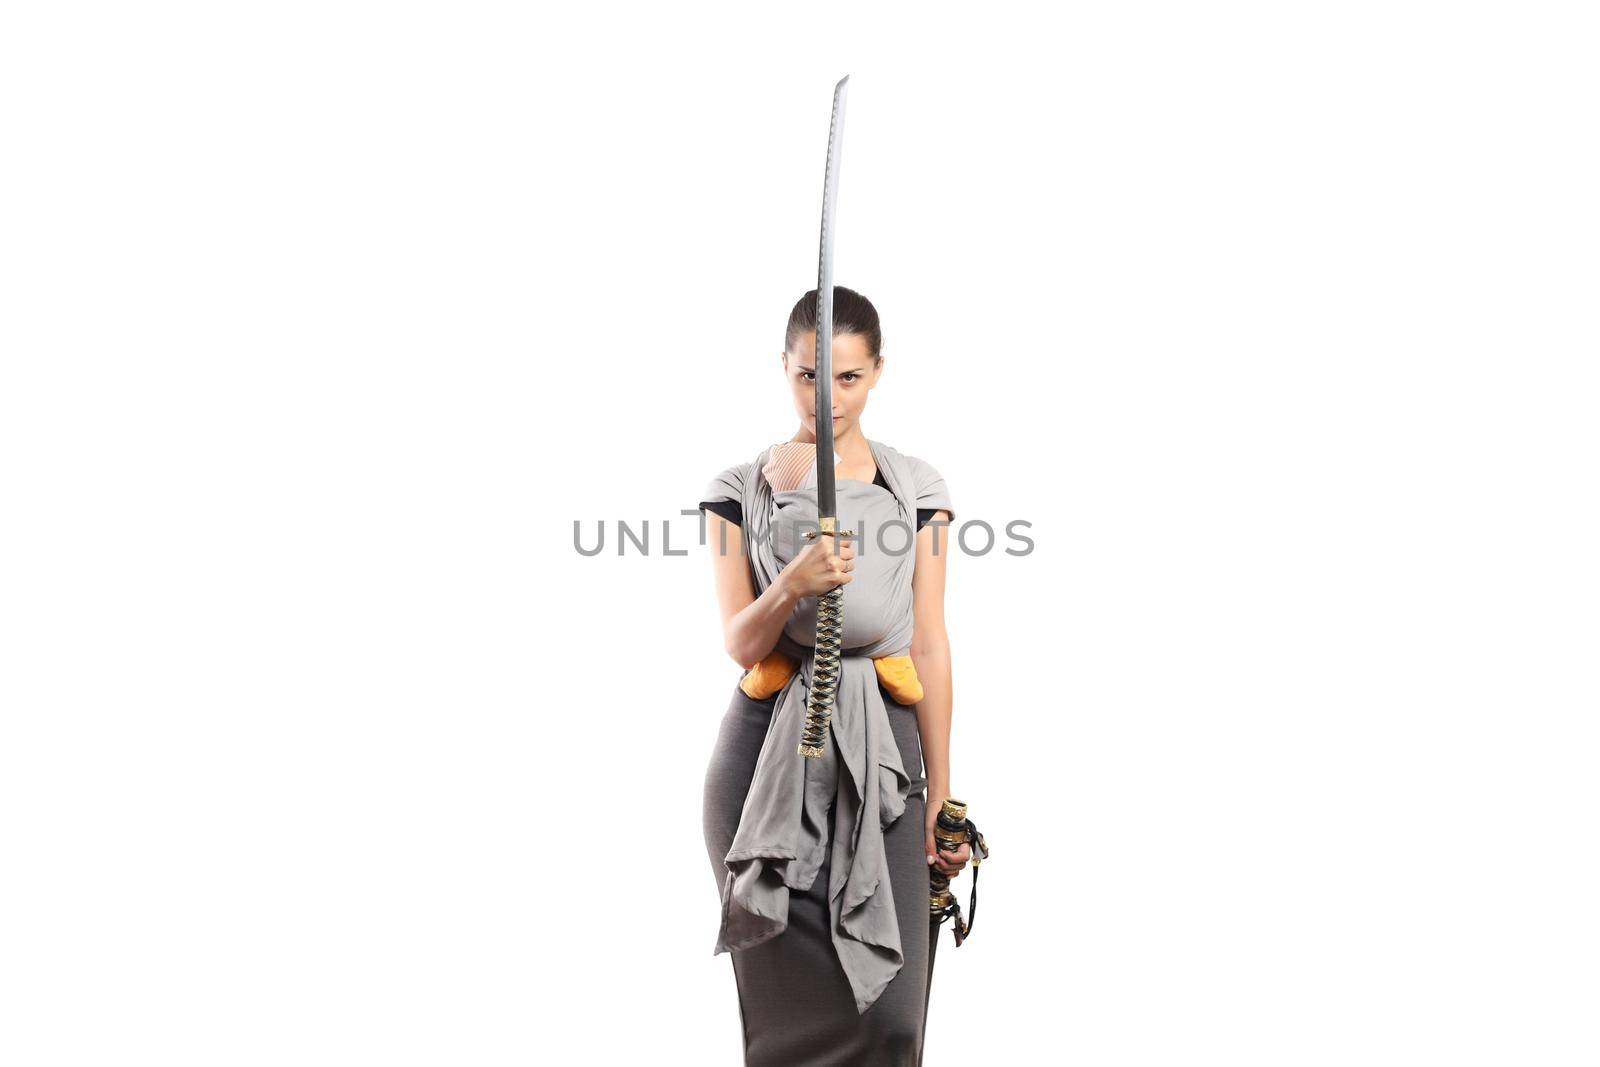 Babywearing attractive young mother with baby in carrier. Holding a japanese sword. mother protection concept.